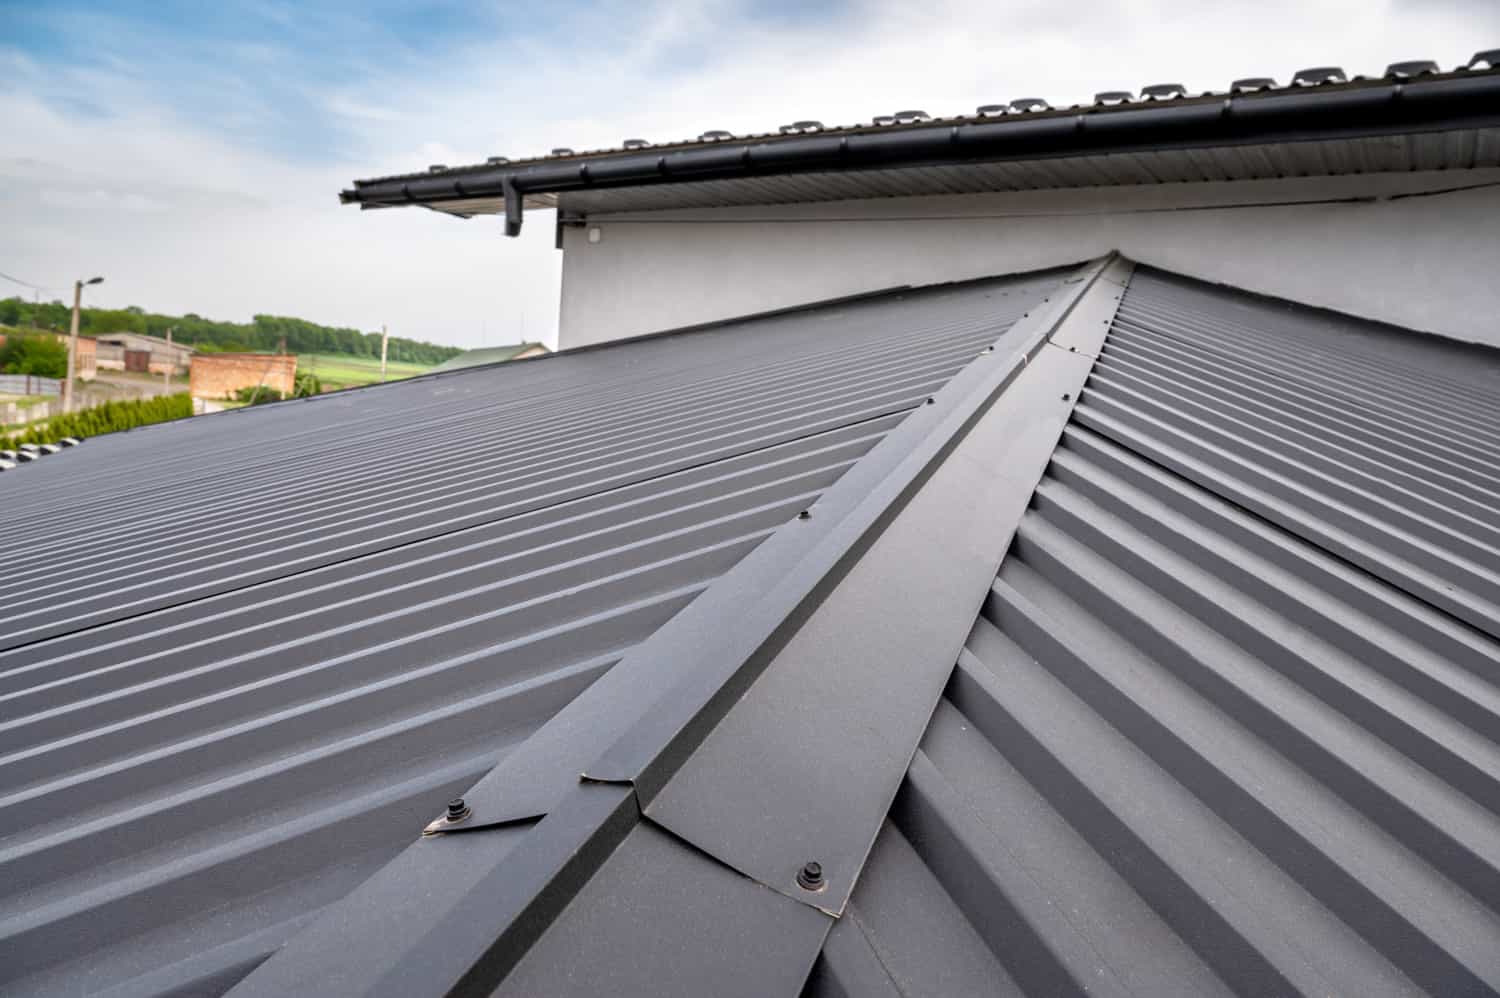  Gutter system for a metal roof. Holder gutter drainage system on the roof.